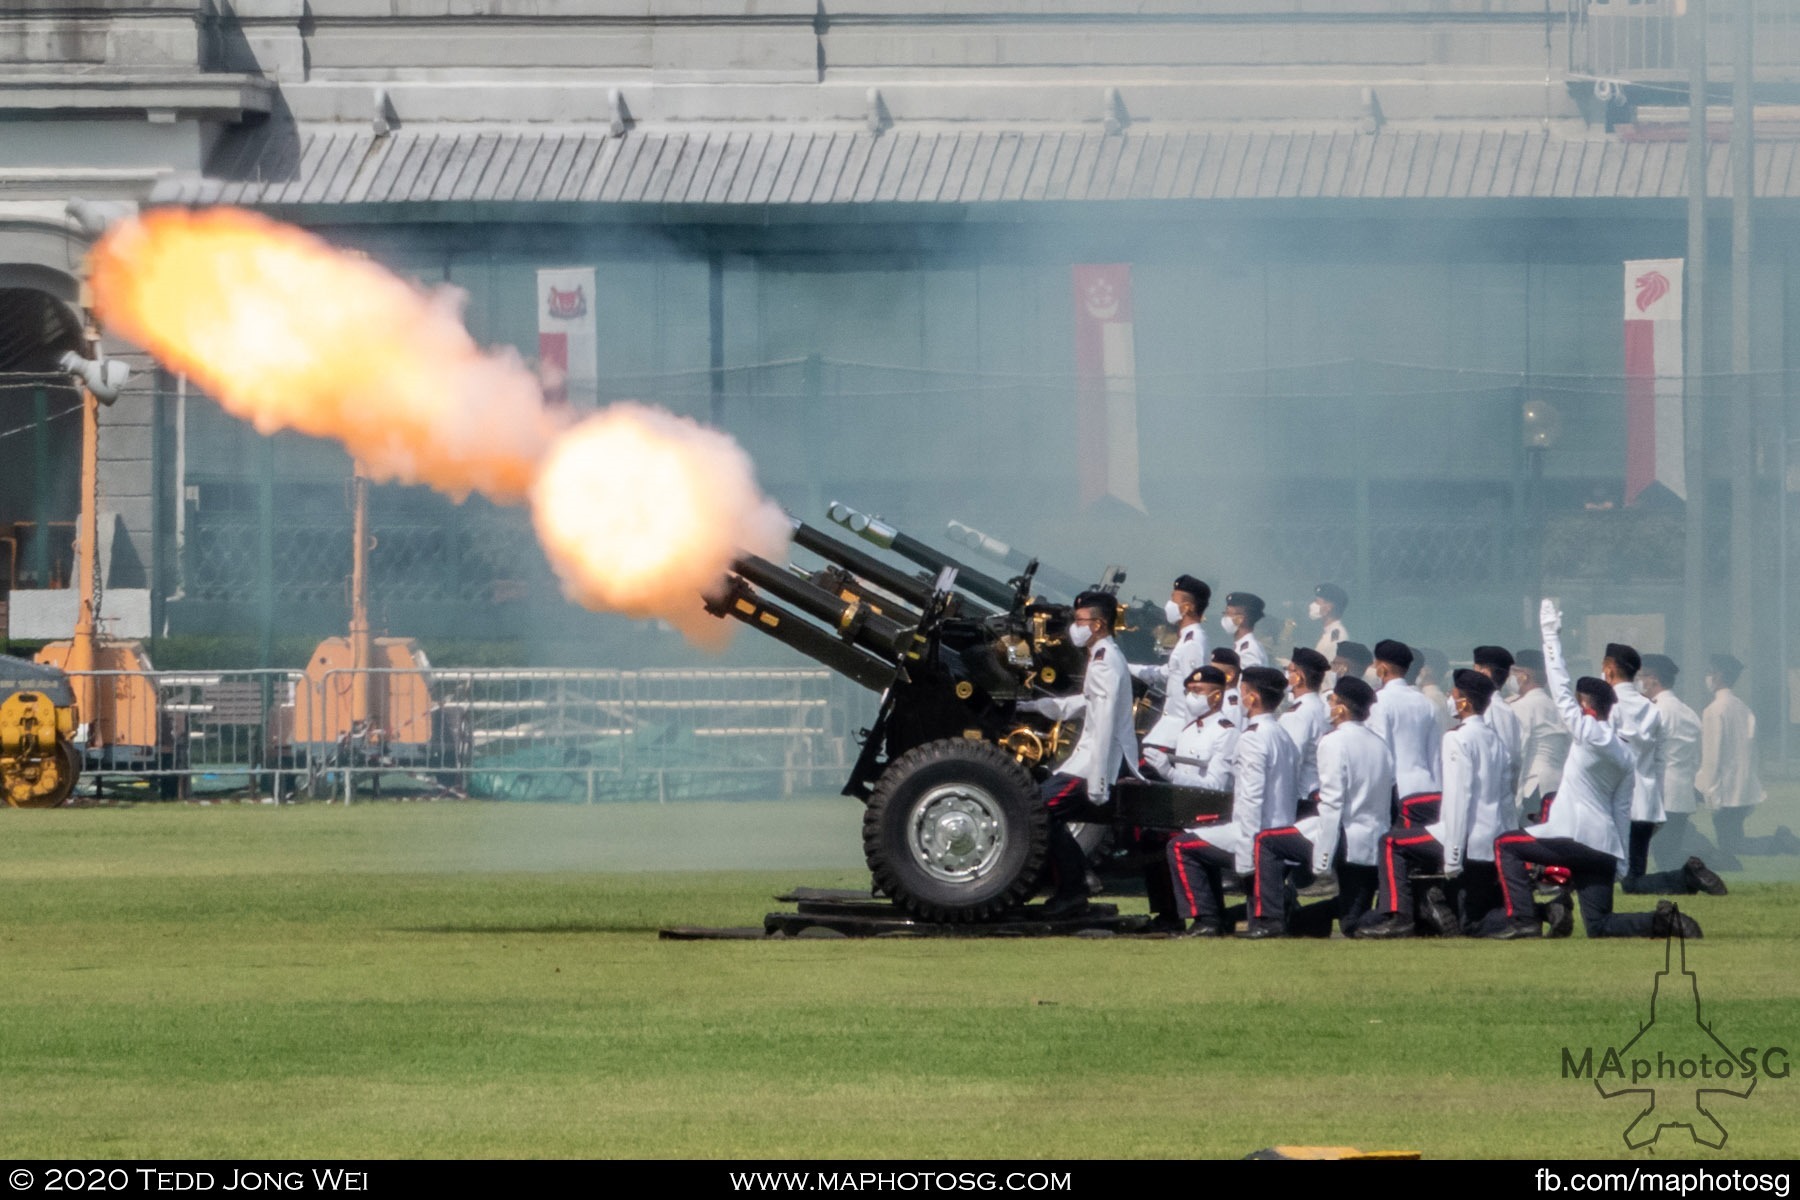 A round is fired off the 25-pounder Ceremonial Gun during the Presidential 21-Gun Salute.